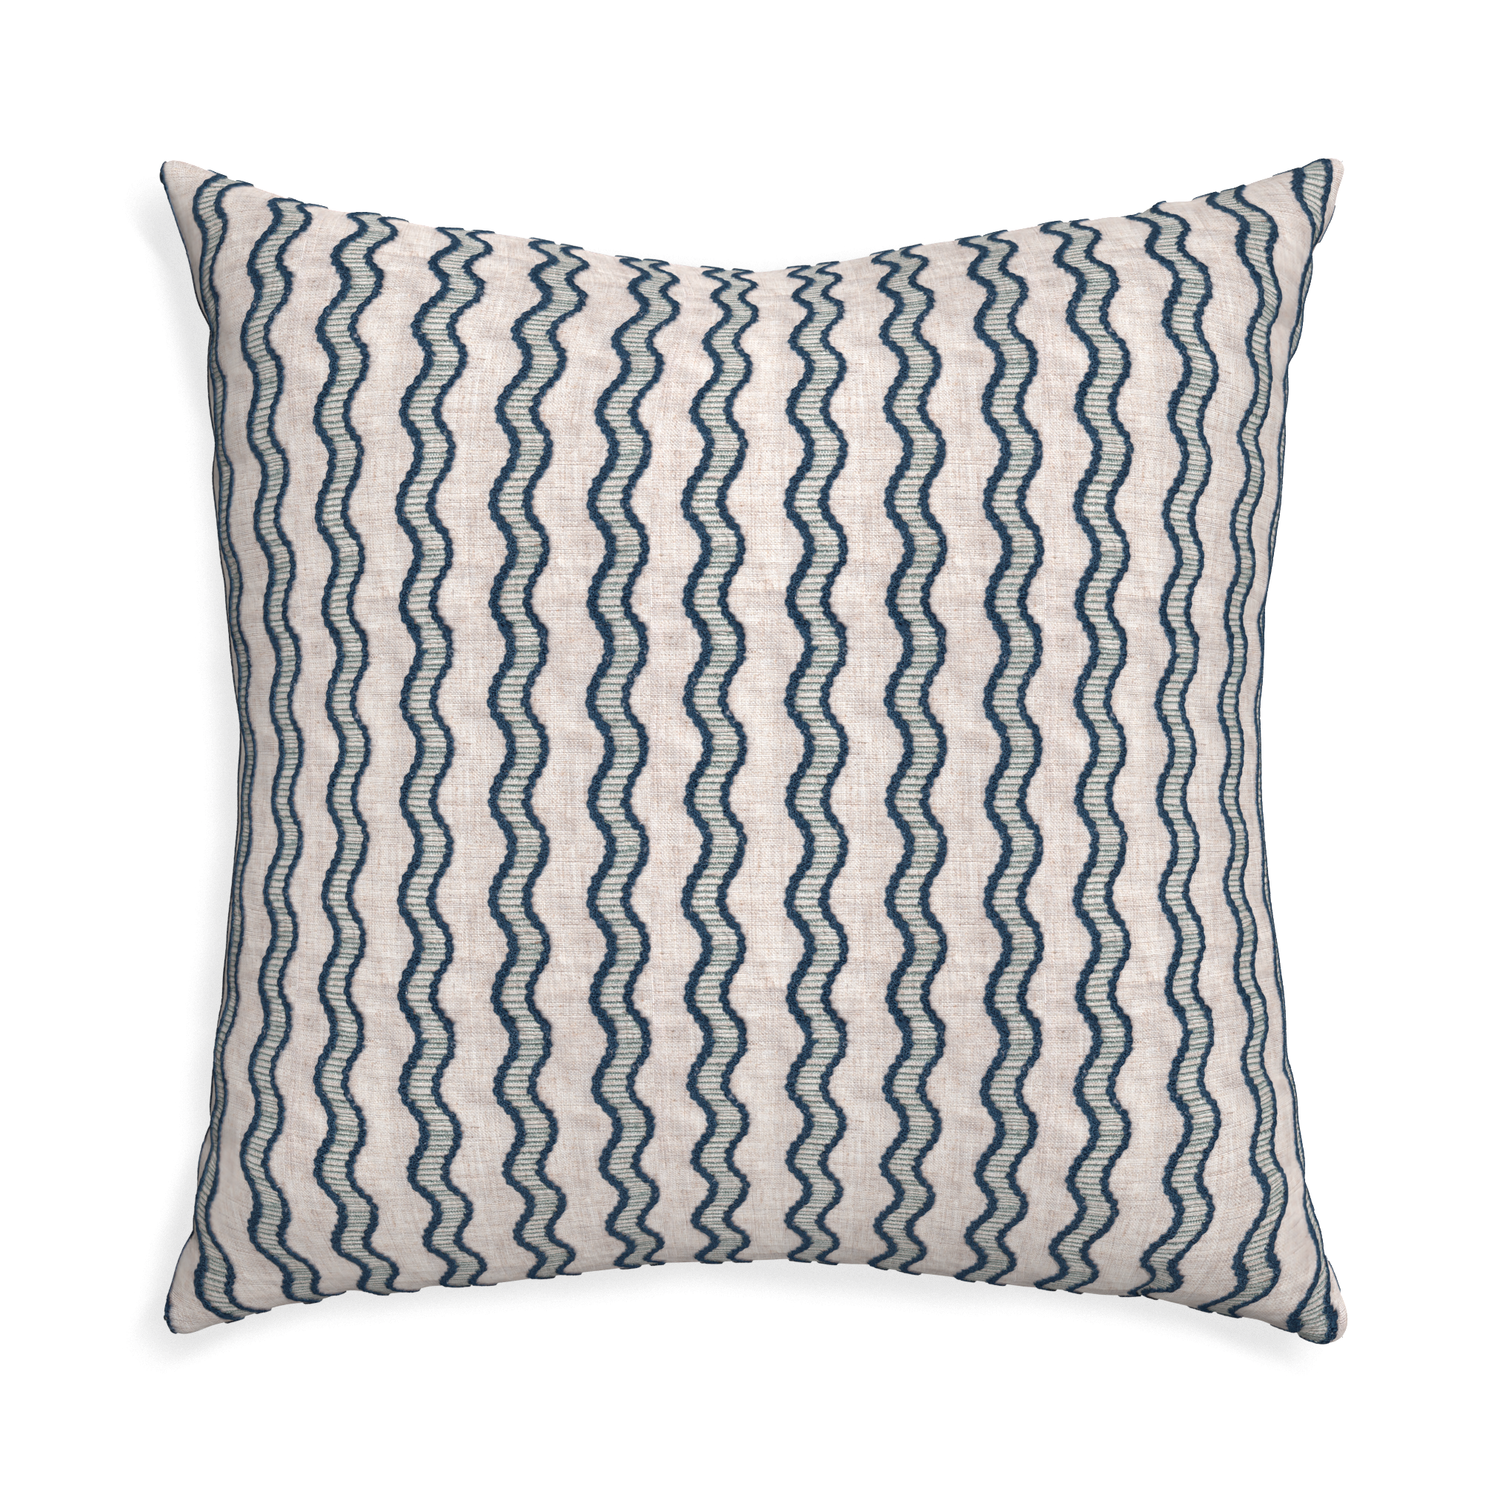 Euro-sham beatrice custom embroidered wavepillow with none on white background